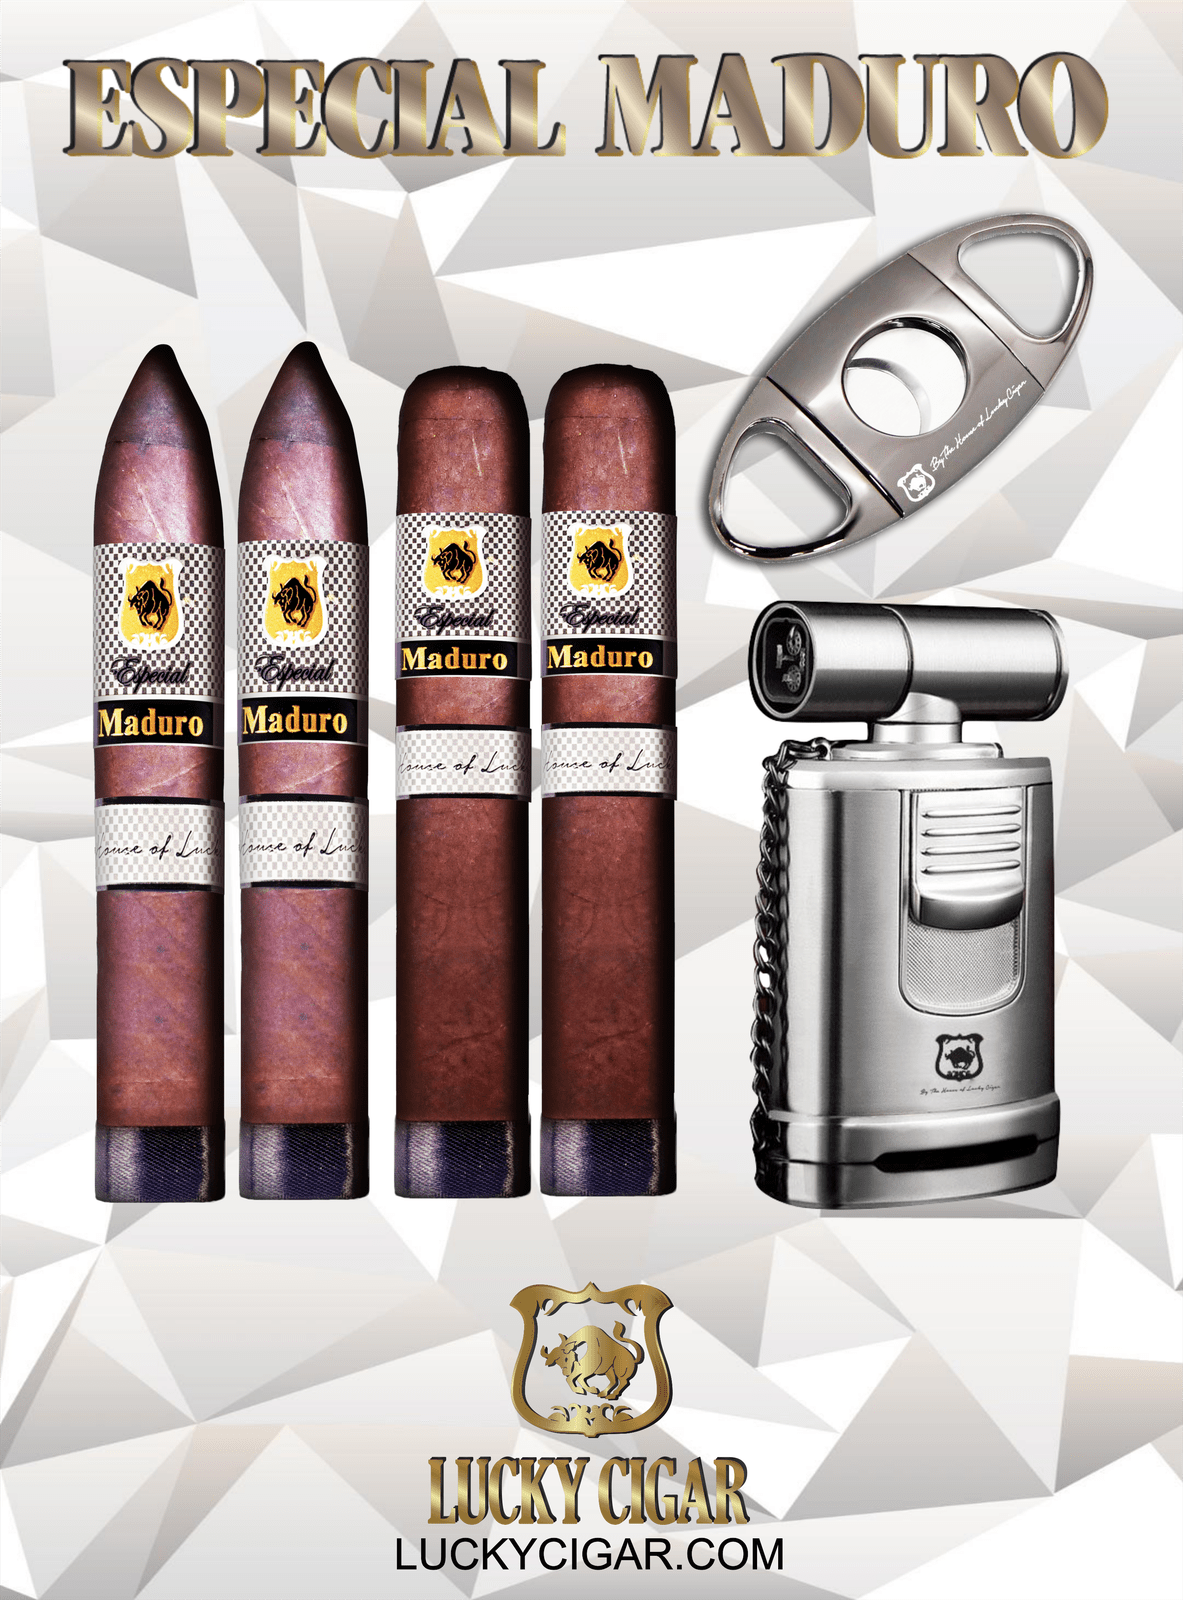 Maduro Cigars: Especial Maduro by Lucky Cigar: Set of 4 Cigars, 2 Toro, 2 Torpedo with Torch, Cutter